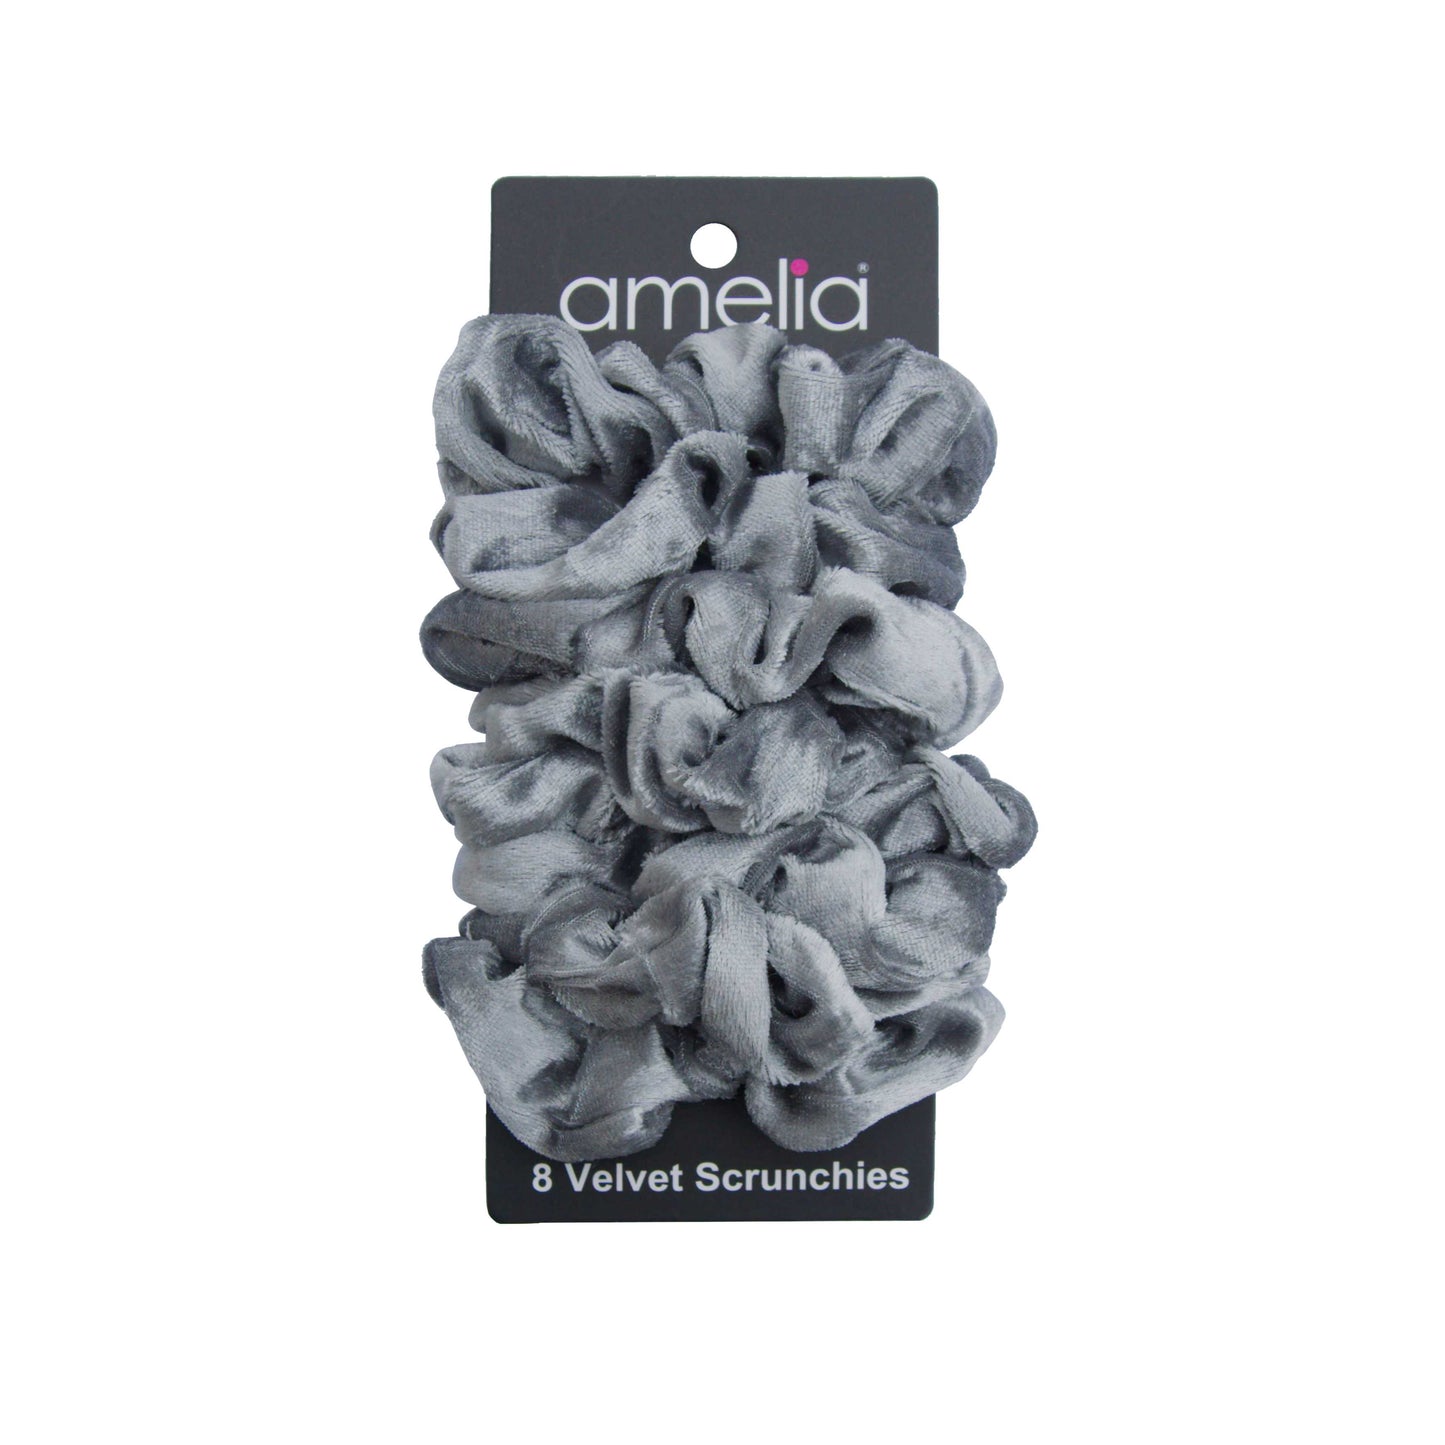 Amelia Beauty, Gray Velvet Scrunchies, 3.5in Diameter, Gentle on Hair, Strong Hold, No Snag, No Dents or Creases. 8 Pack